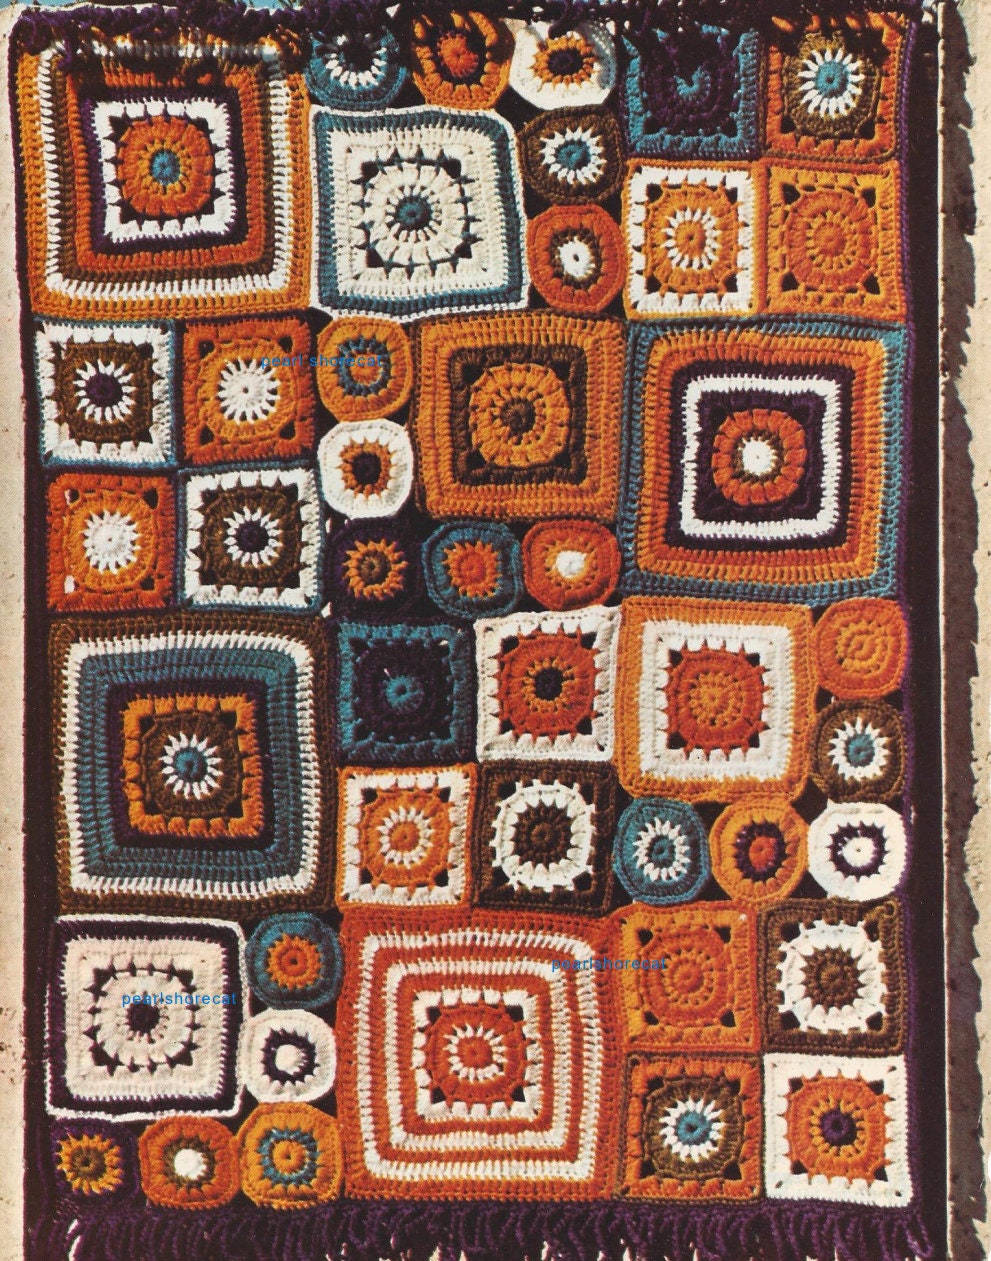 The First Granny Square: Translating the 1880s' Crazy-Quilt Trend to Crochet